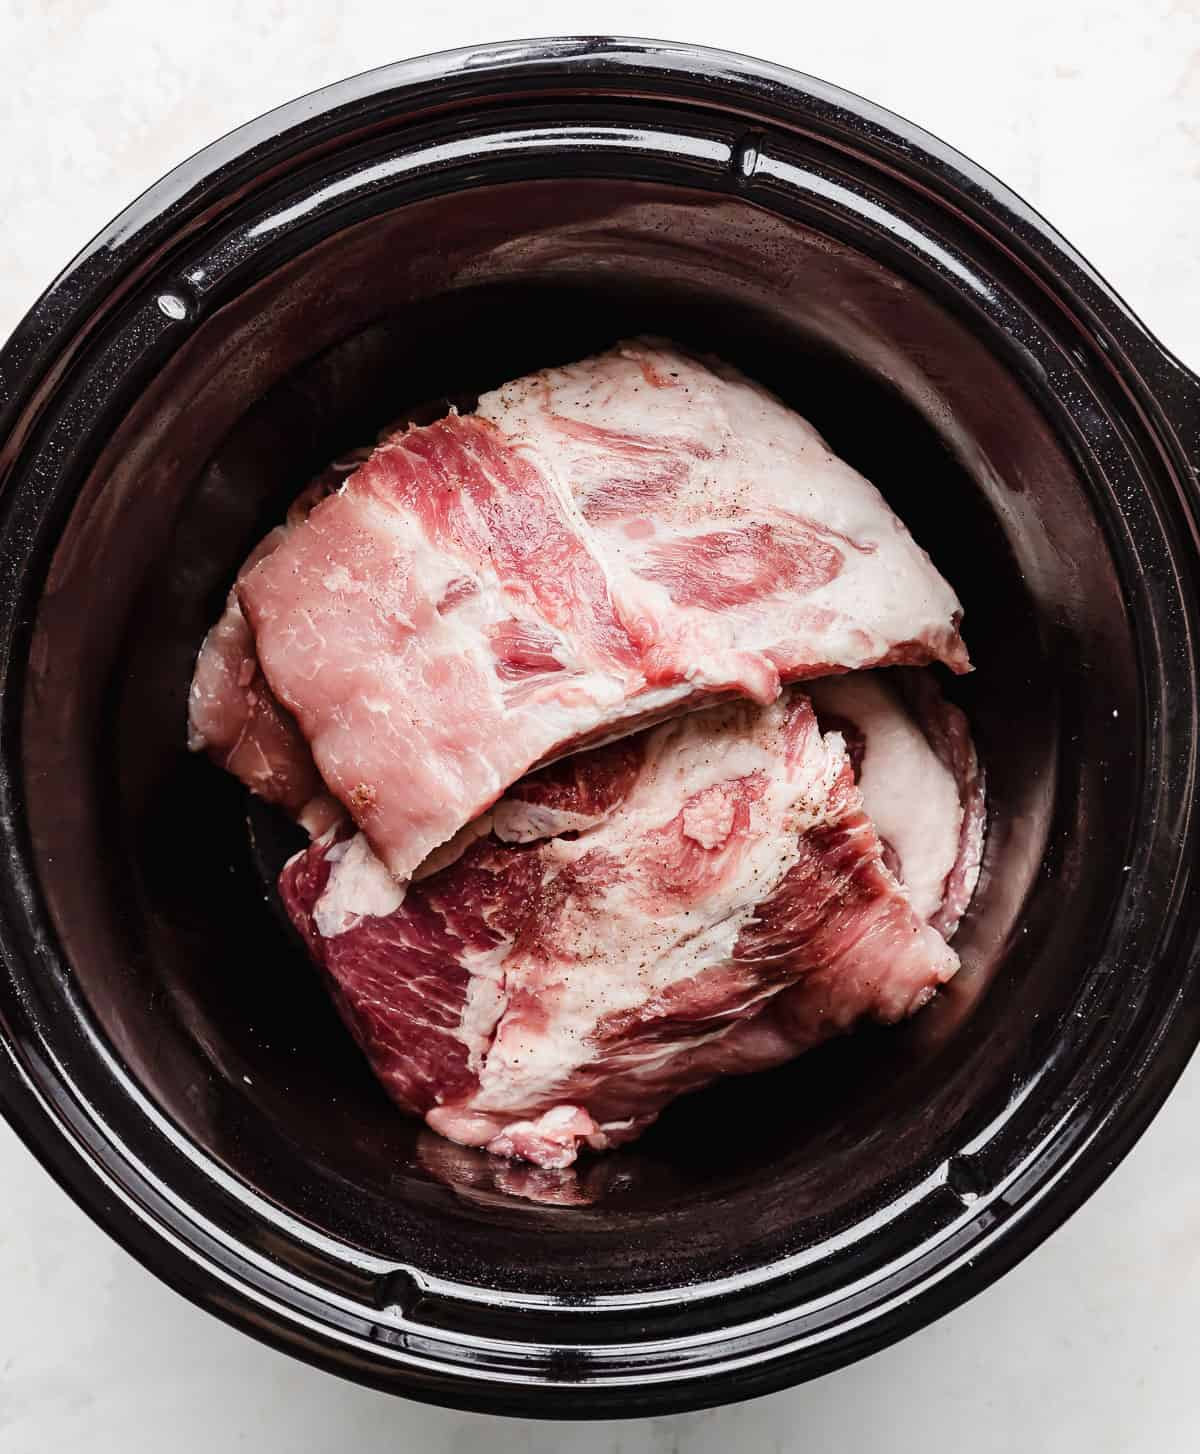 Uncooked baby back pork ribs in a black round slow cooker.